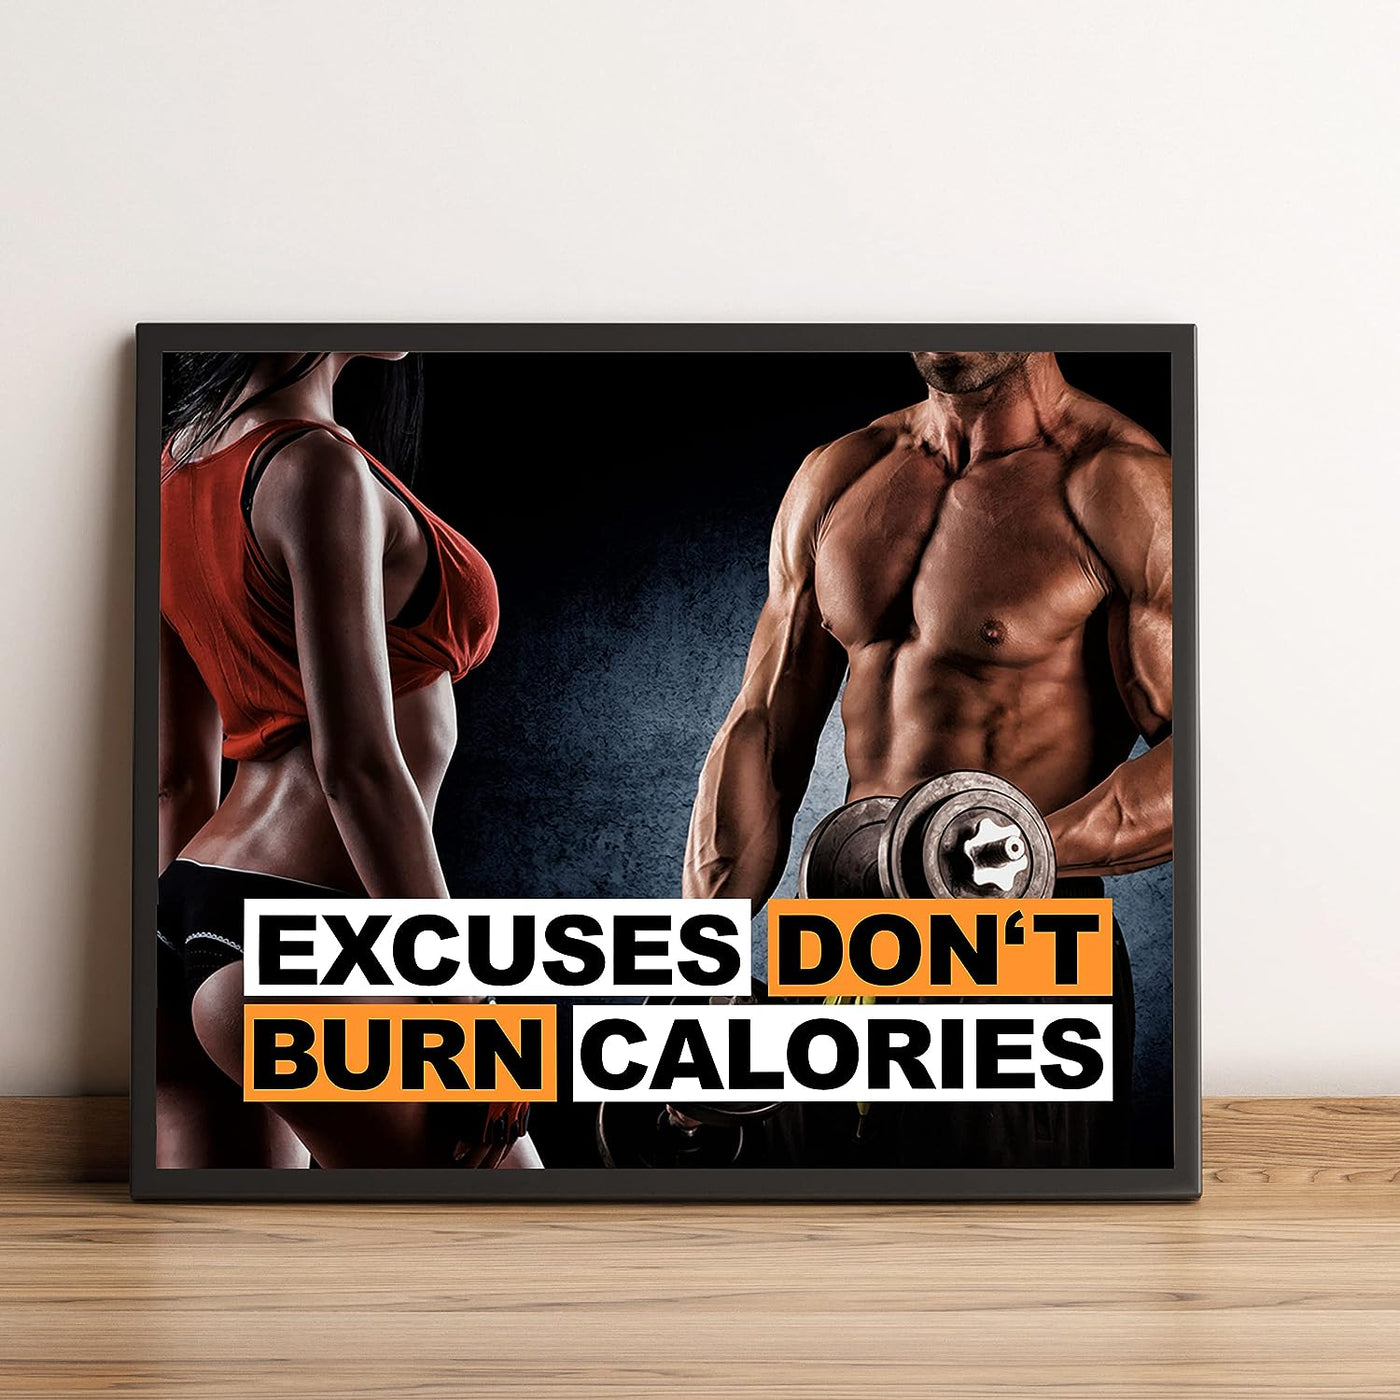 Excuses Don't Burn Calories Motivational Exercise Sign -10 x 8" Inspirational Wall Print- Ready to Frame. Modern Fitness Poster Print for Home-Office-Gym-Studio Decor. Great Gift of Motivation!